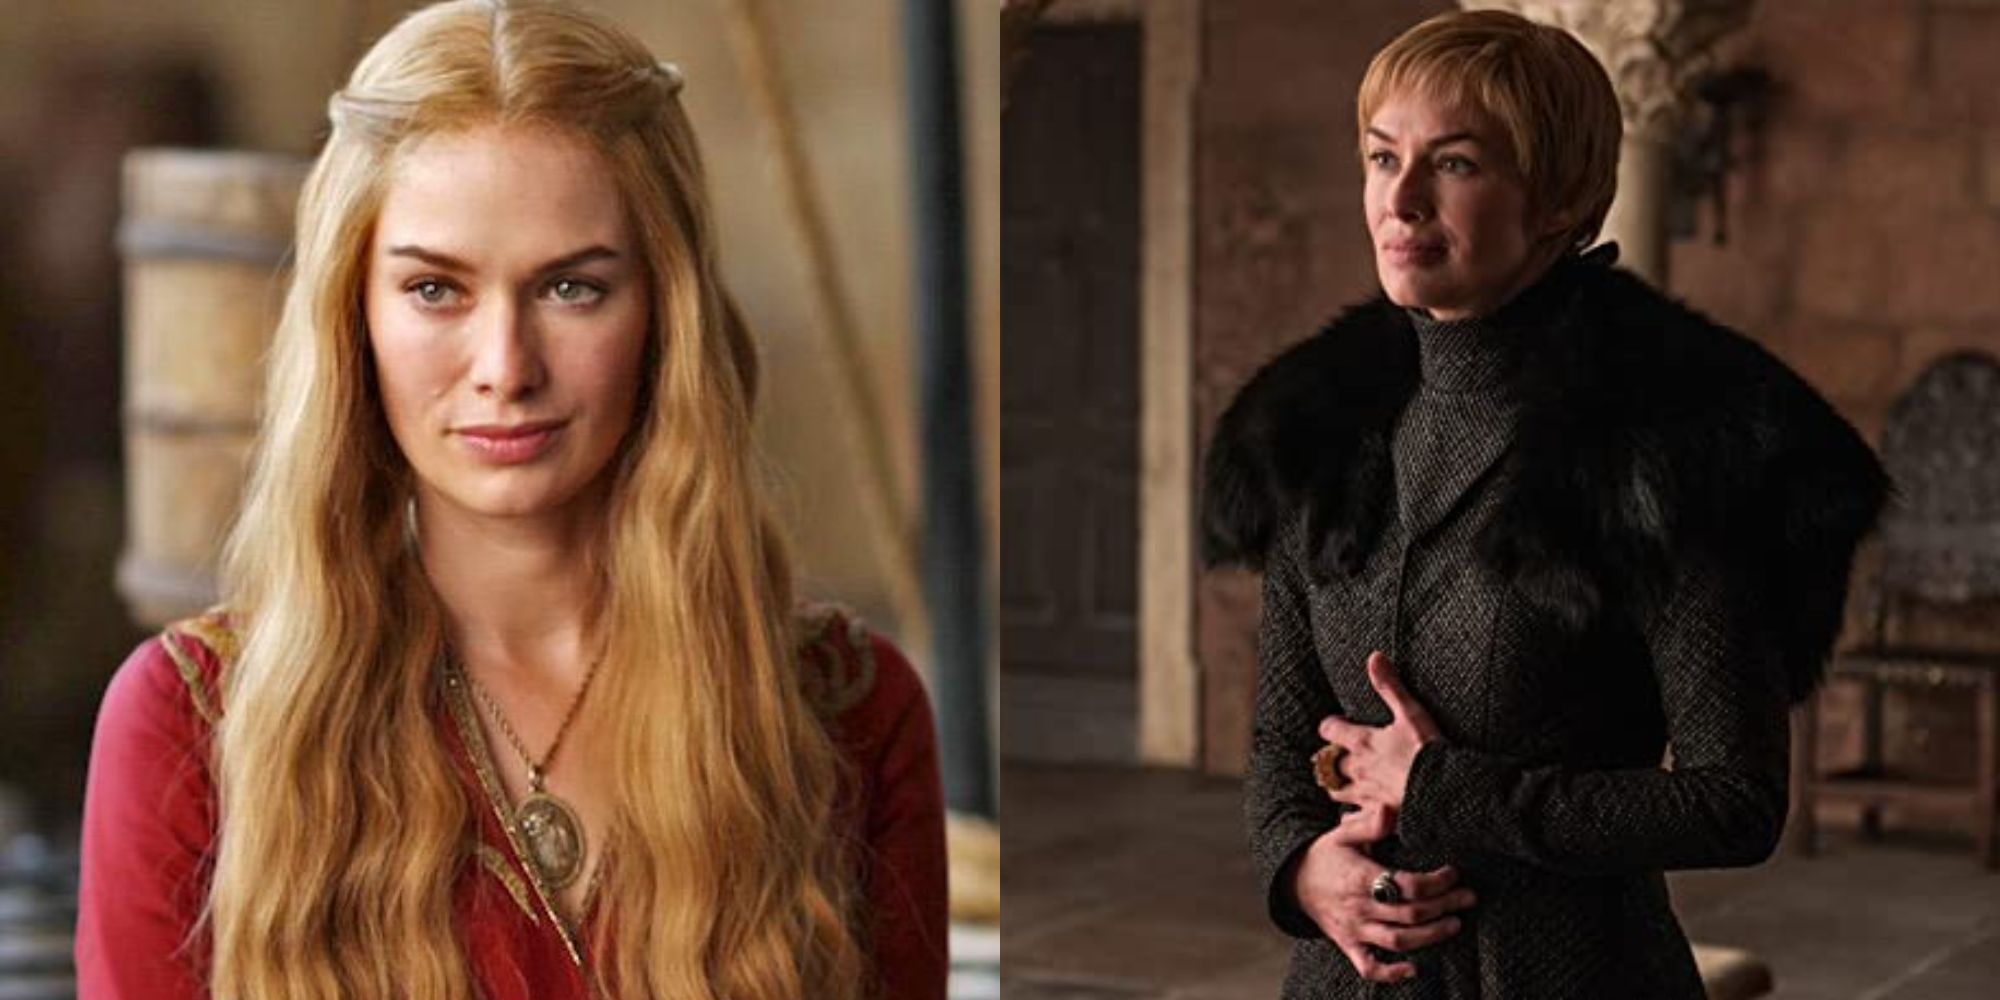 Split iamge showing Cersei Lannister with long and short hair in Game of Thrones.